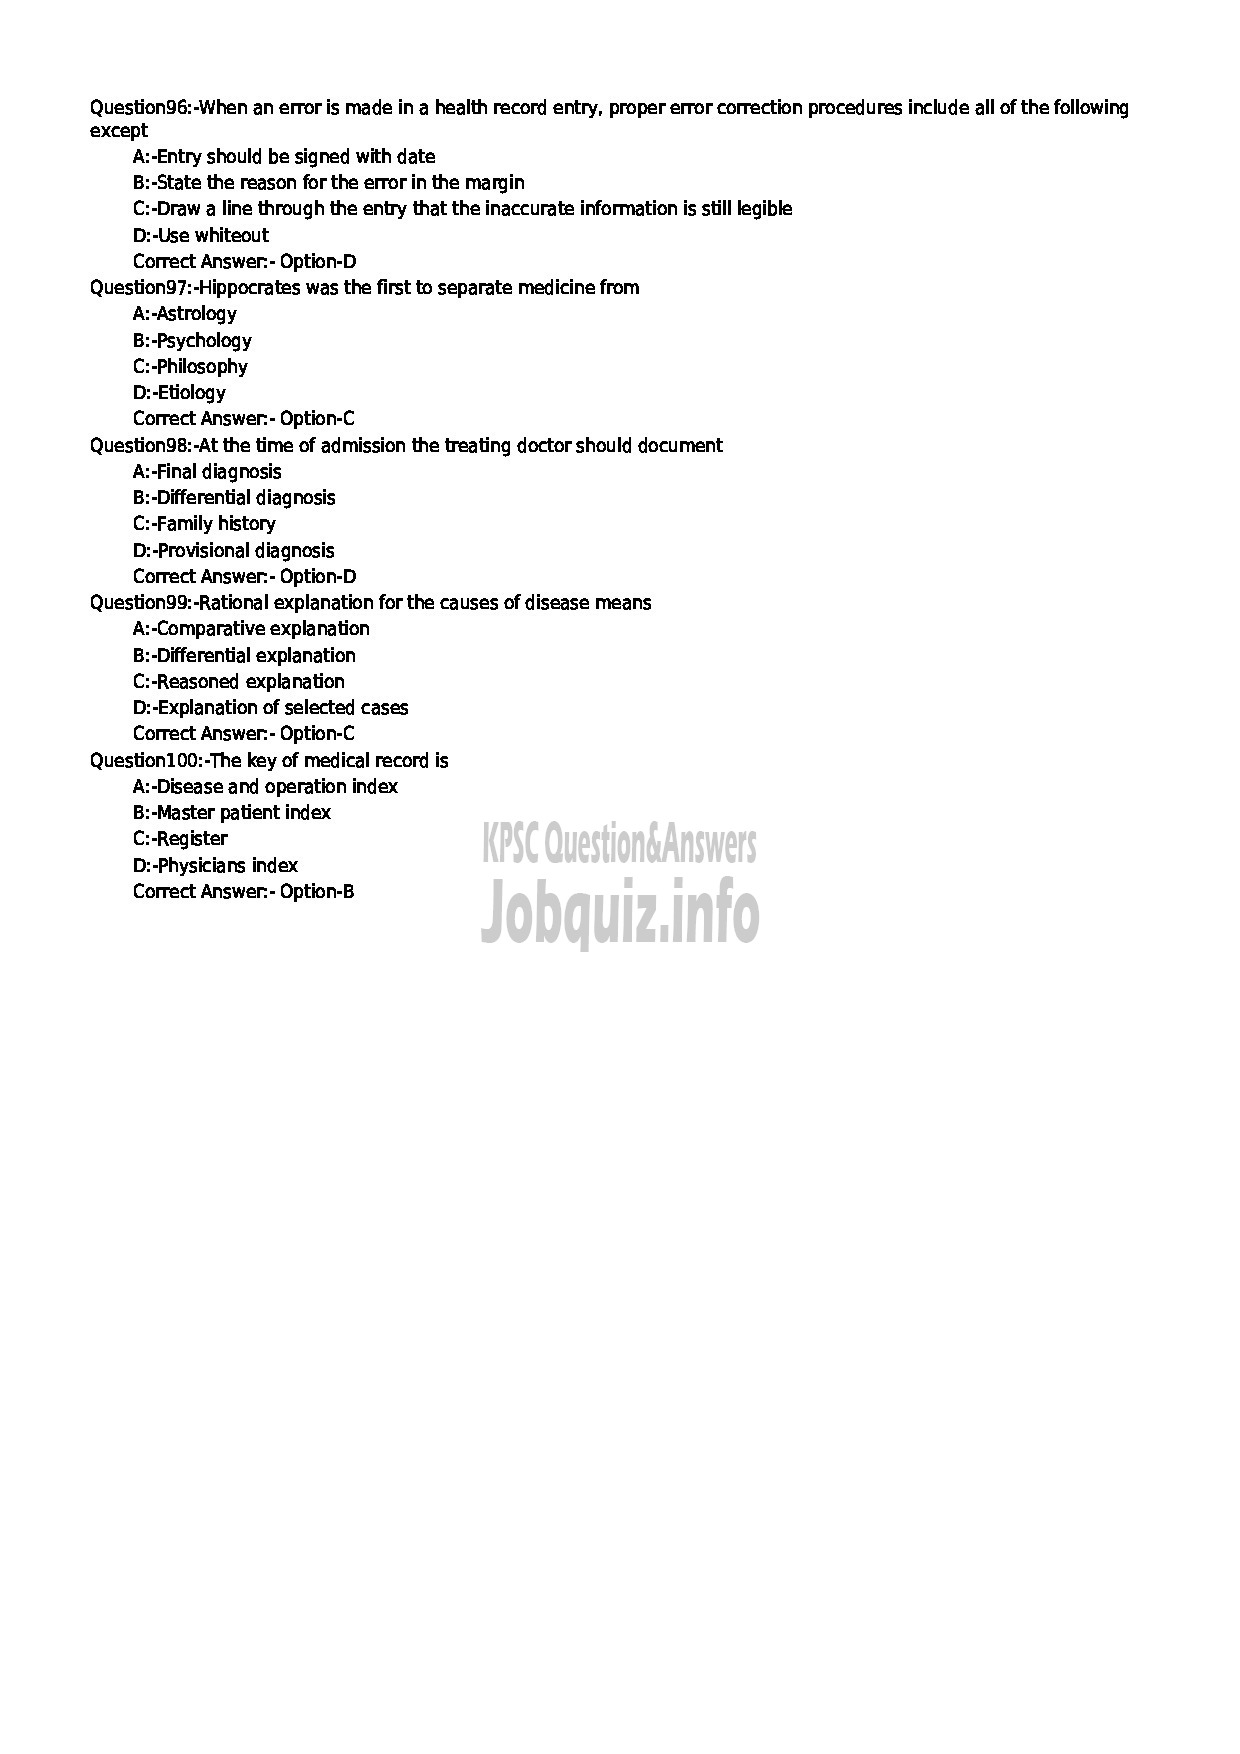 Kerala PSC Question Paper - MEDICAL RECORD LIBRARIAN GR II INSURANCE MEDICAL SERVICES-11